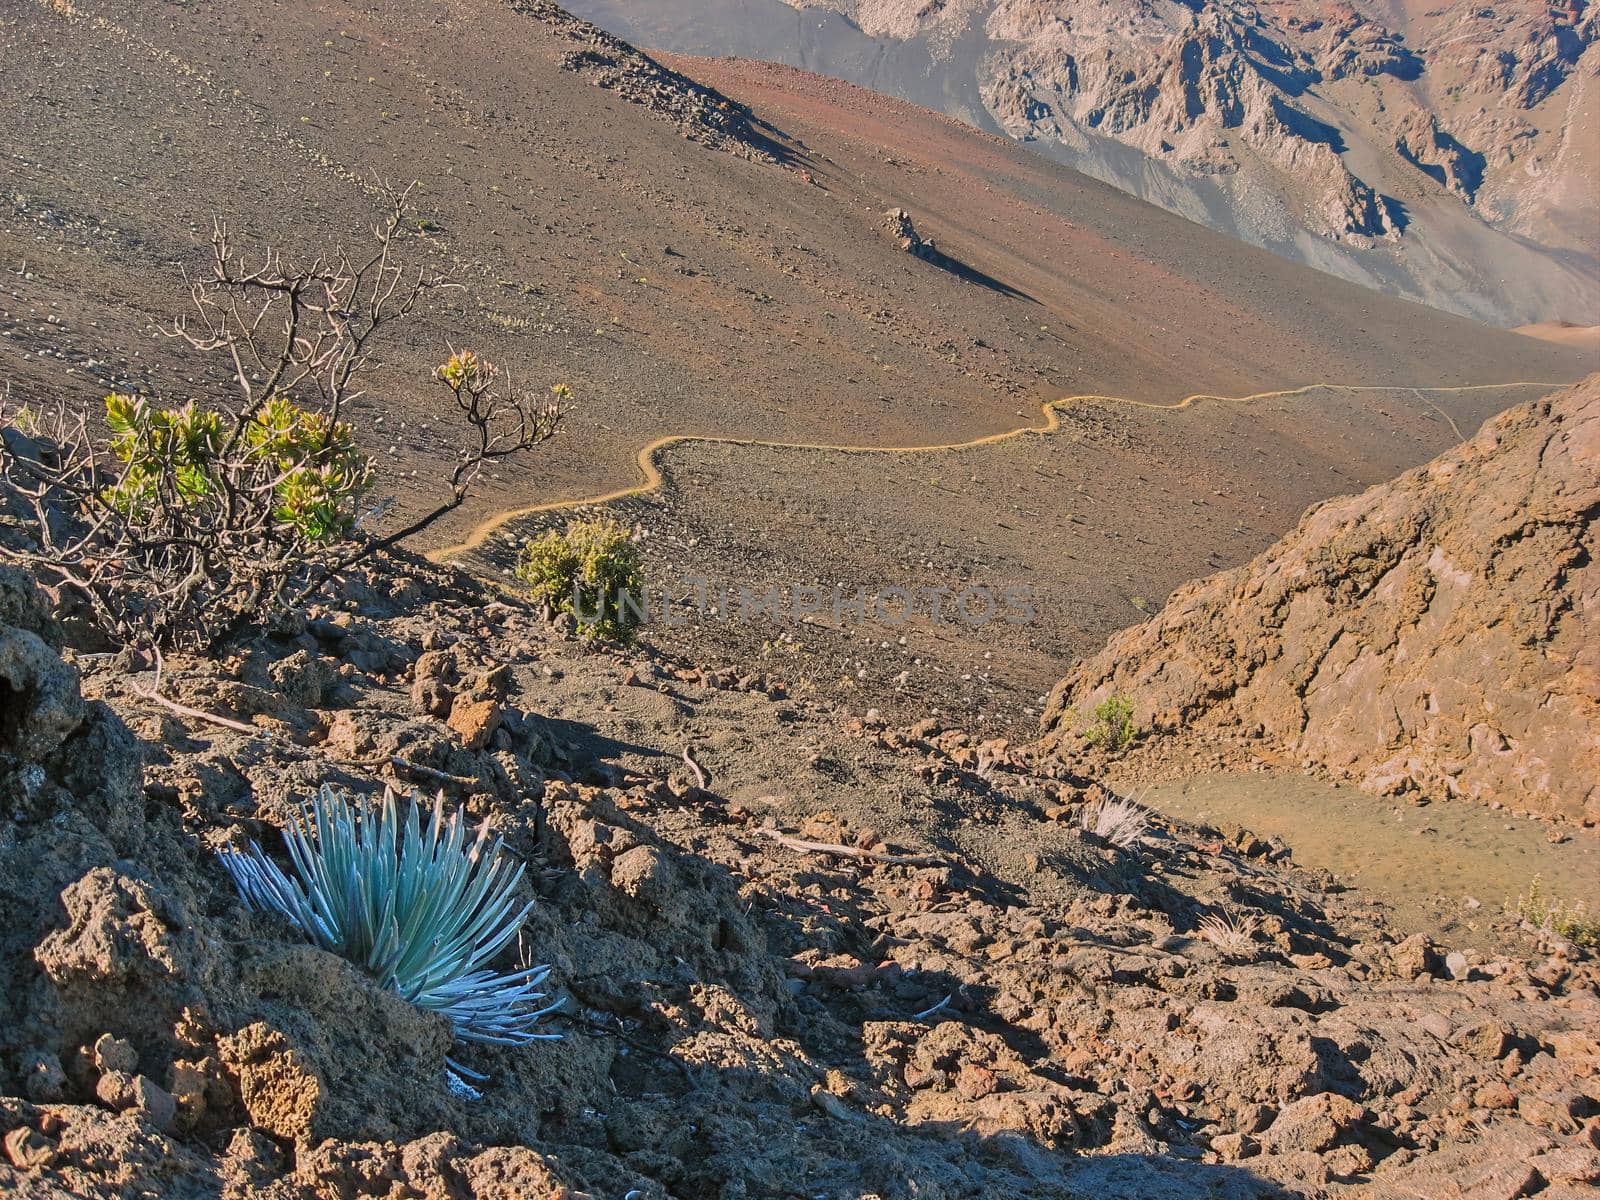 Haleakala Silversword with Hiking Trail in Background leading down from summit of Haleakala National Park. High quality photo